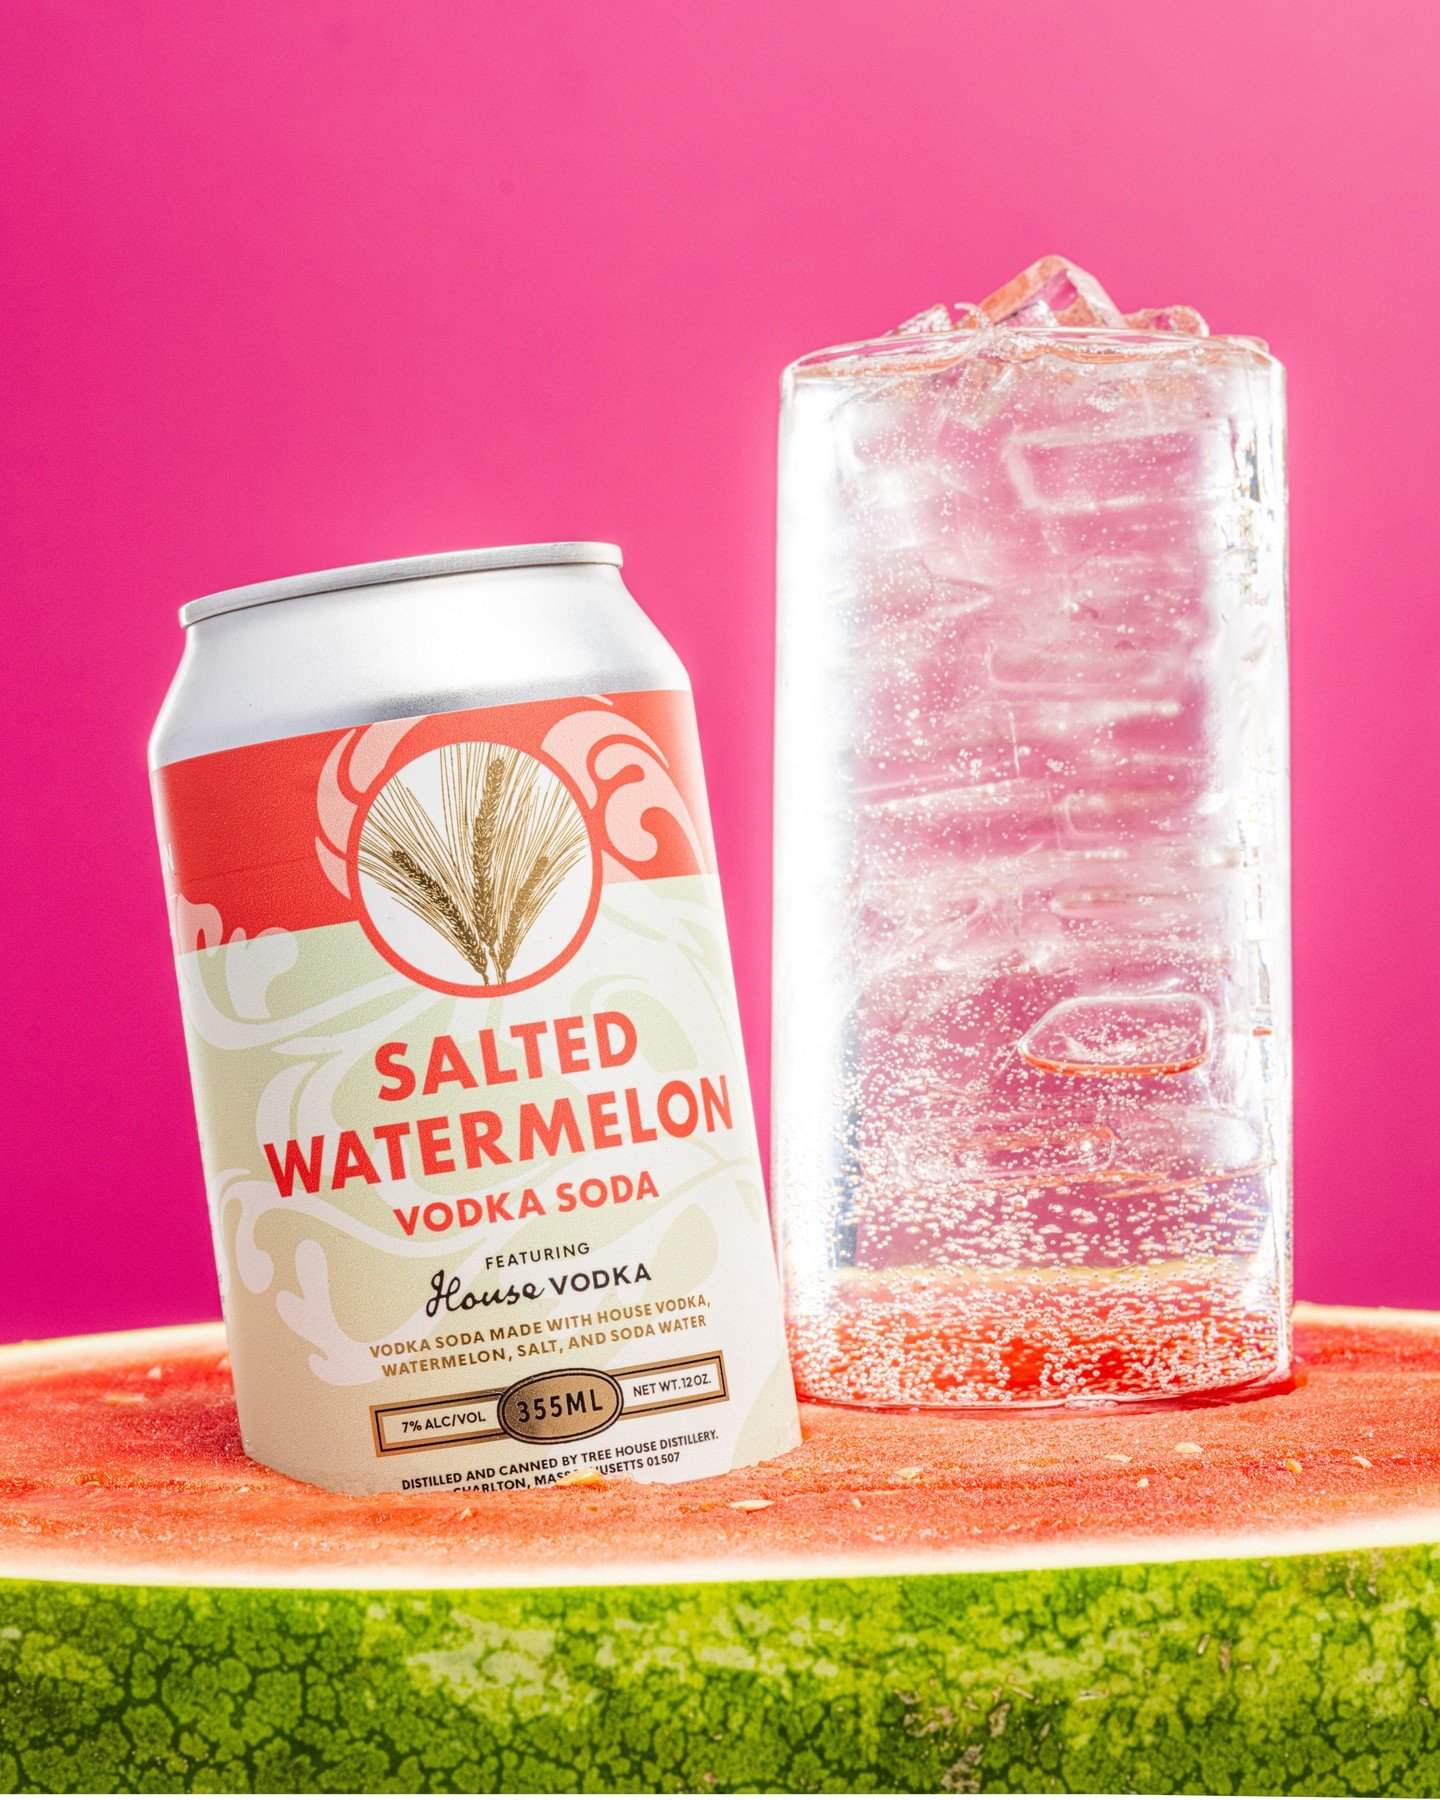 Today, we are delighted that our Salted Watermelon Vodka Soda is returning!

🧂🍉 🧂🍉 🧂🍉 🧂🍉 🧂🍉 

#productphotography #photography #craftdistillery #distillery #distilling #treehousebrewing #fujifilm #gfx100II @fujifilmx_us @profoto